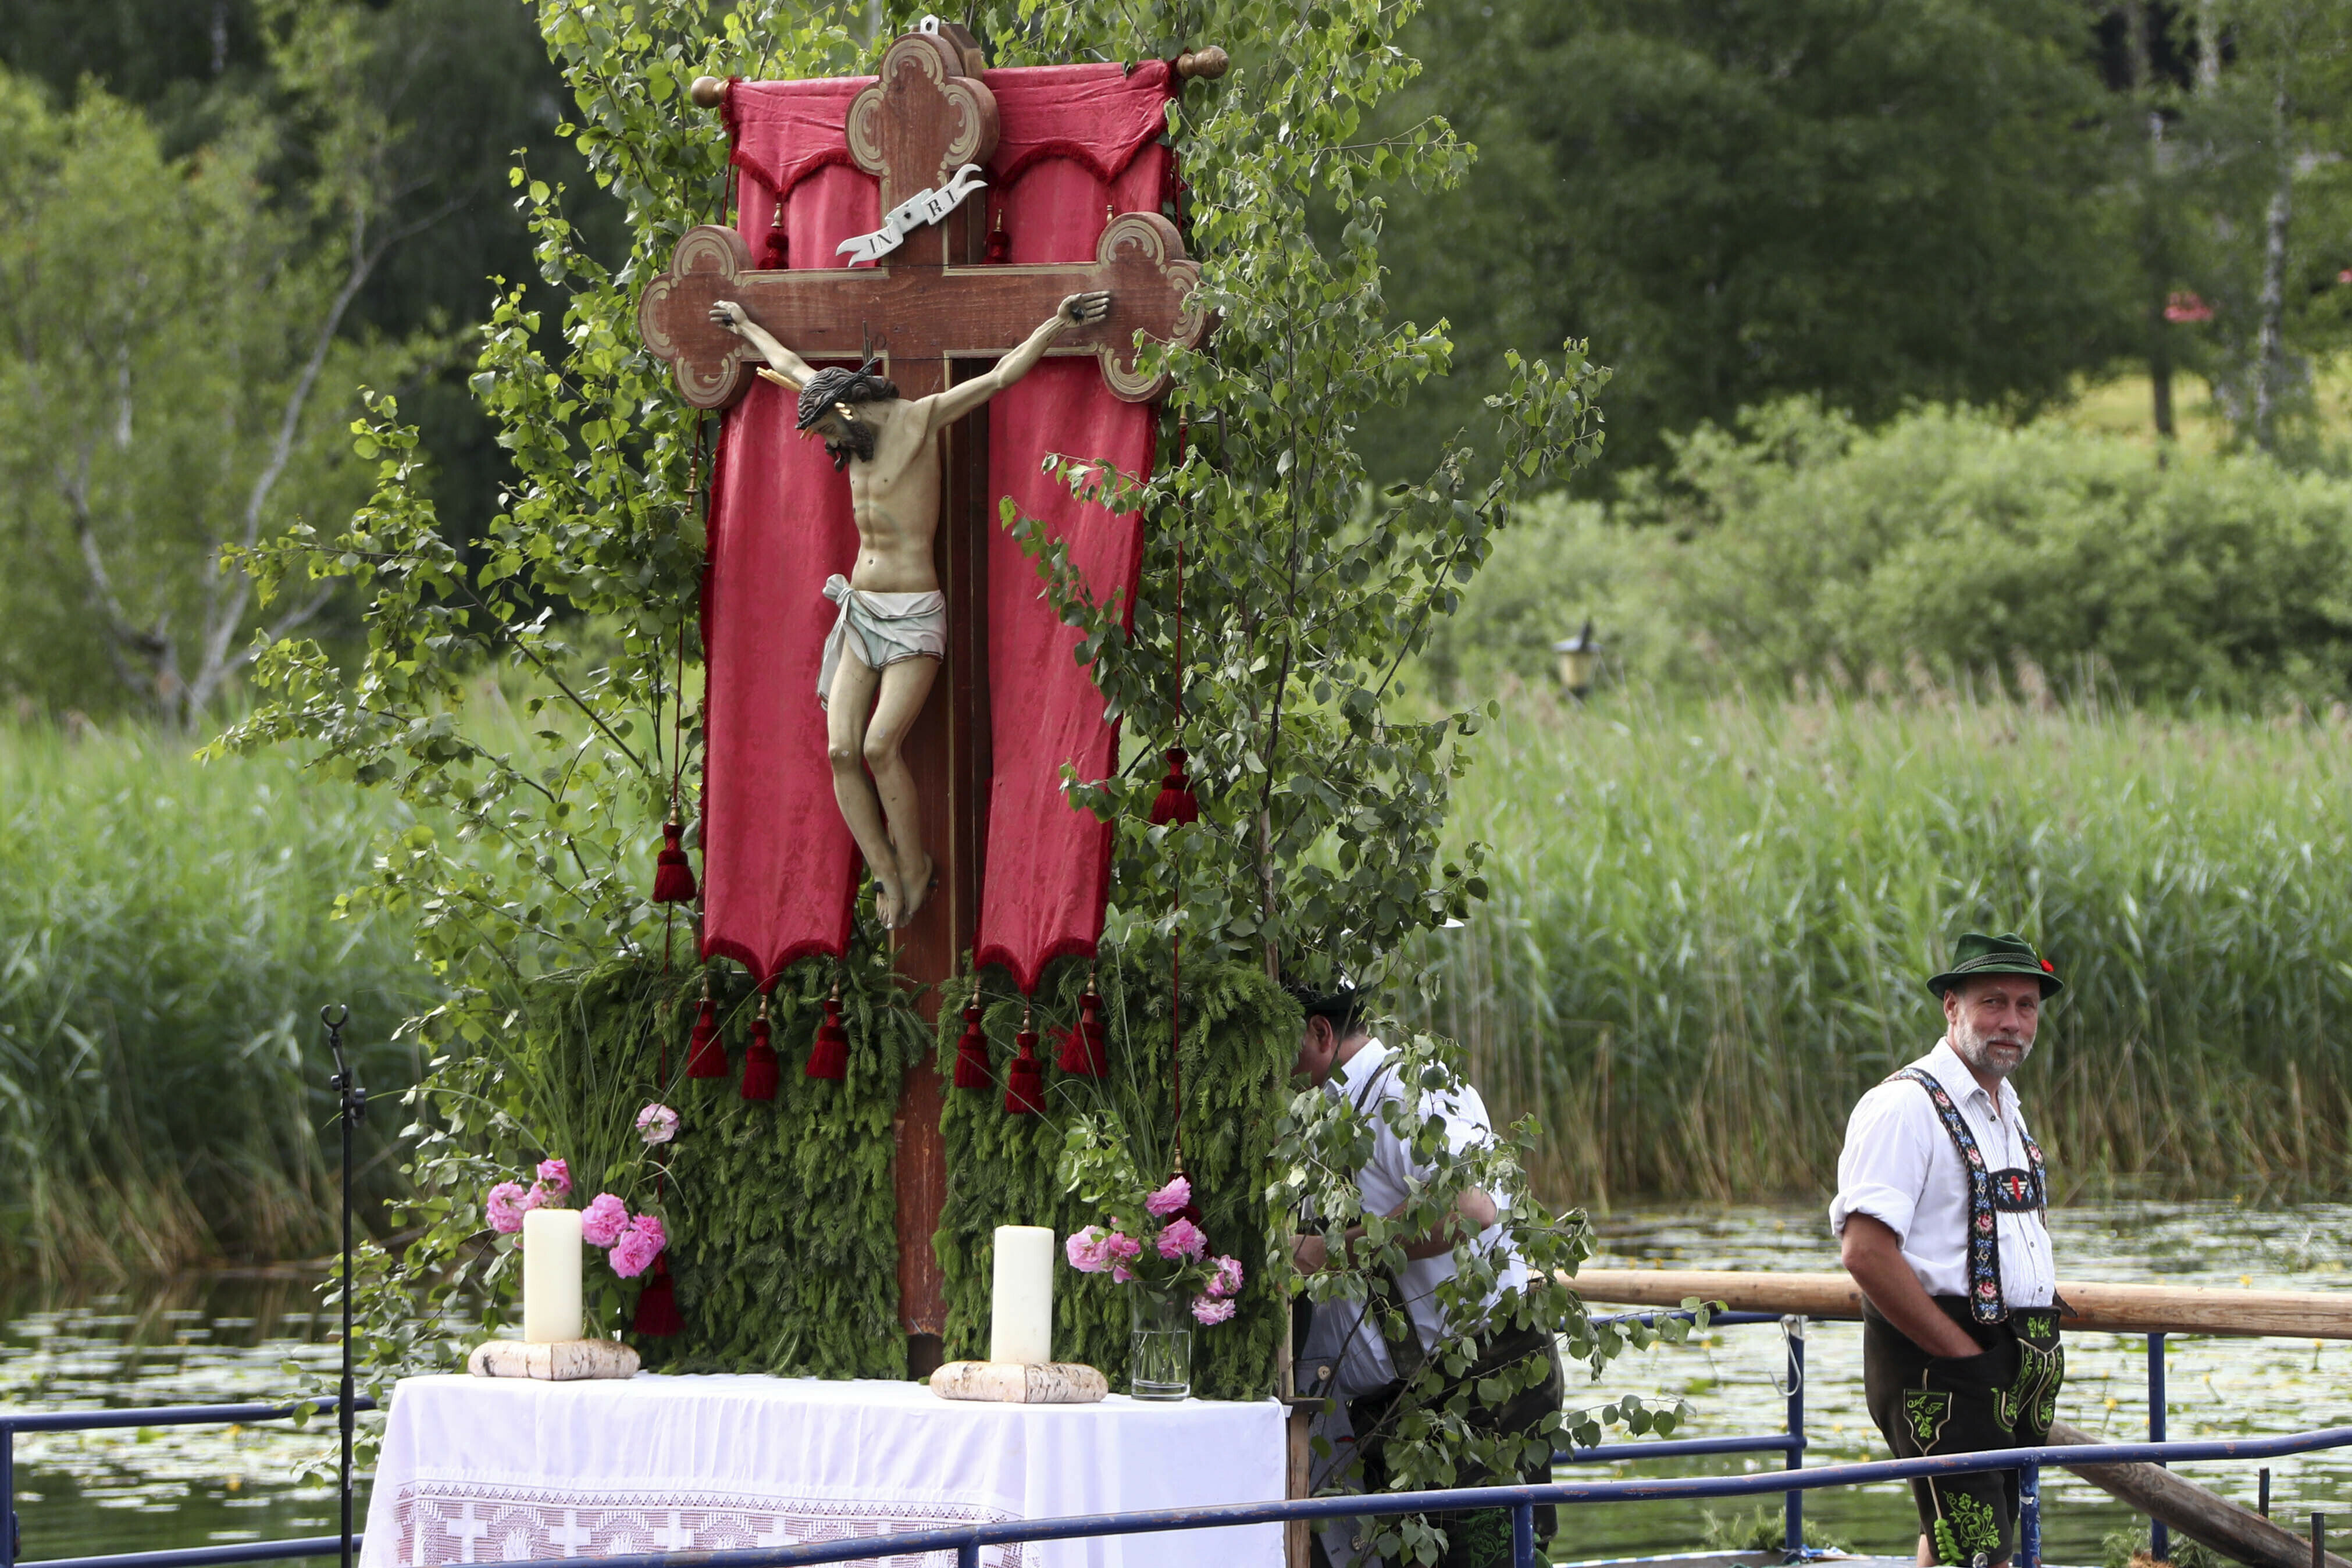 People dressed in traditional clothes wait for the start of a Corpus Christi procession at lake Staffelsee in Seehausen near Murnau, Germany, Thursday, June 20, 2019. (AP Photo/Matthias Schrader)